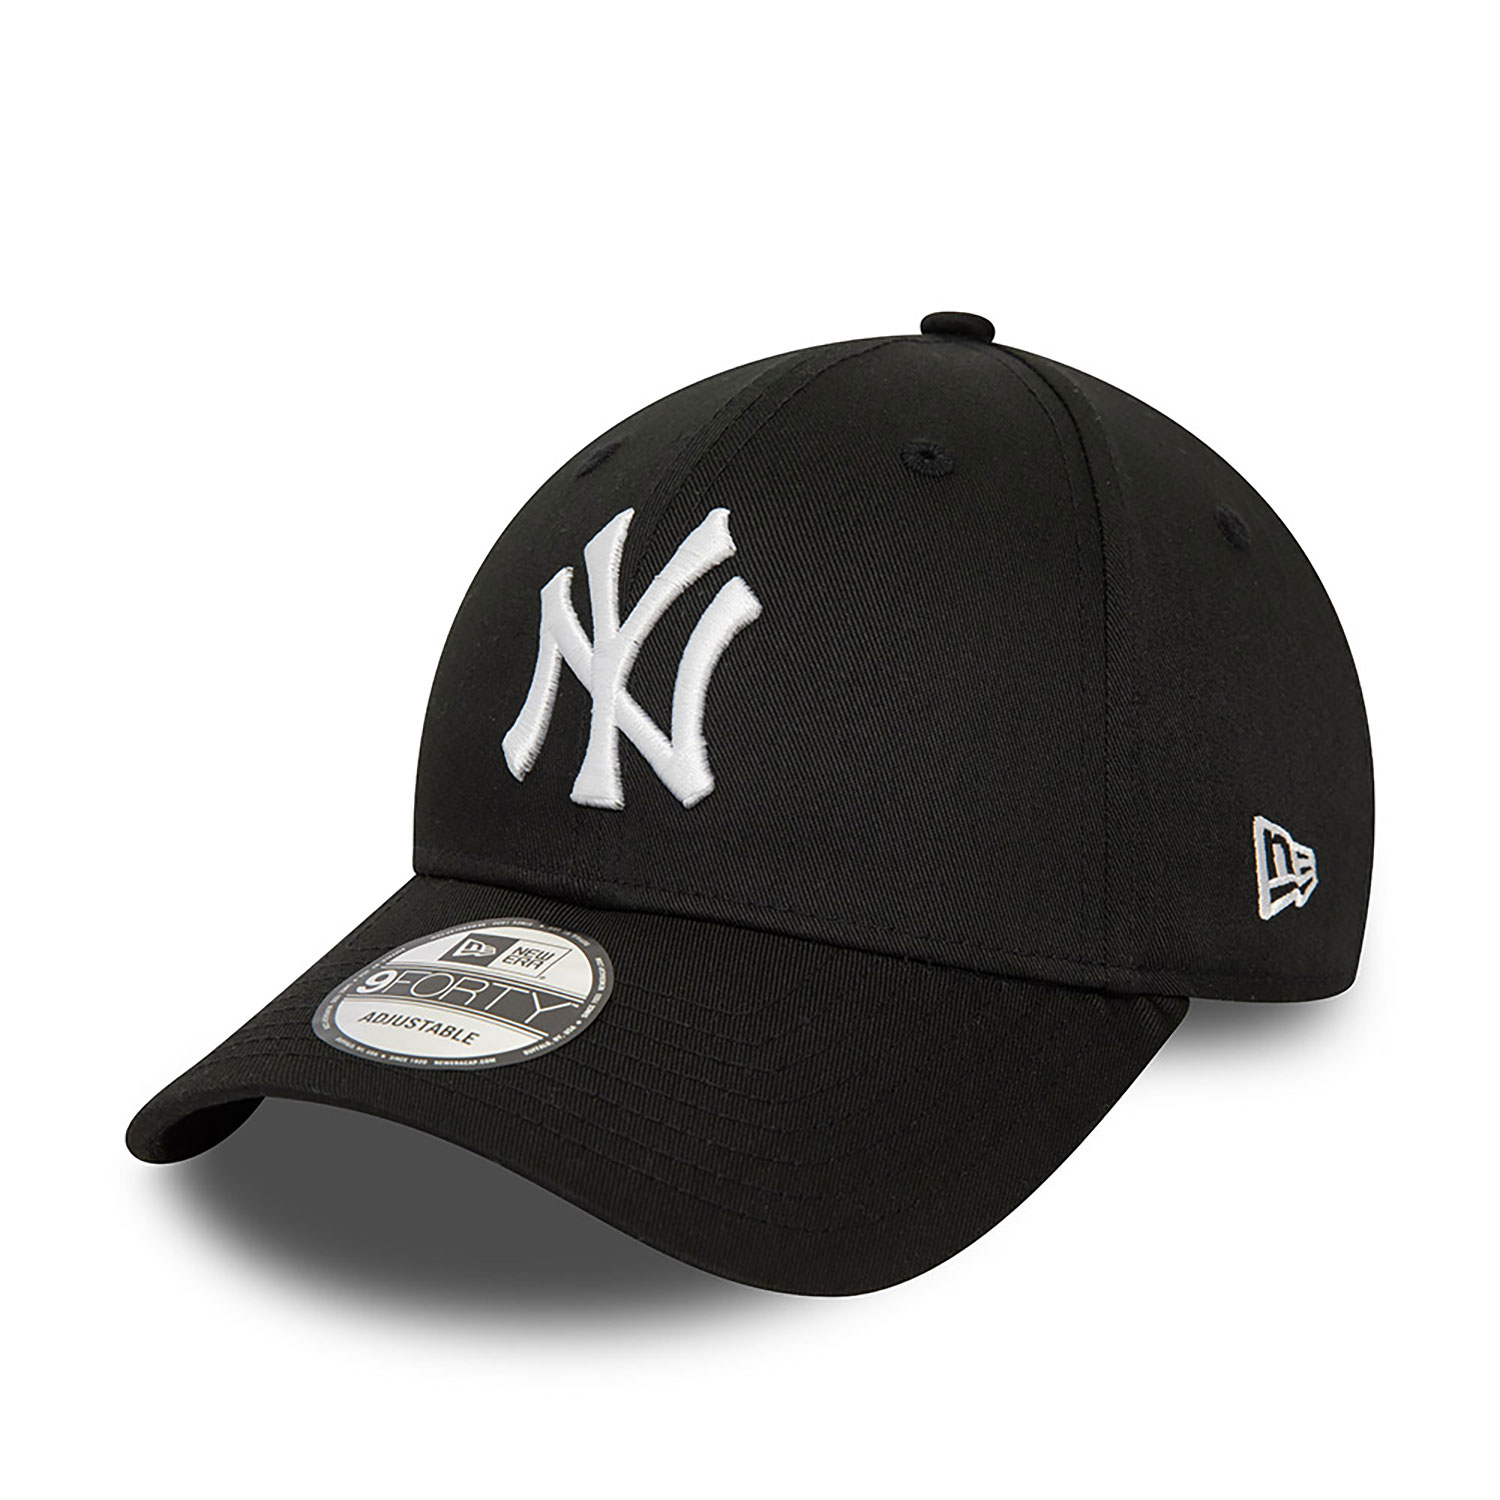 New York Yankees World Series Patch Black 9FORTY Adjustable Cap